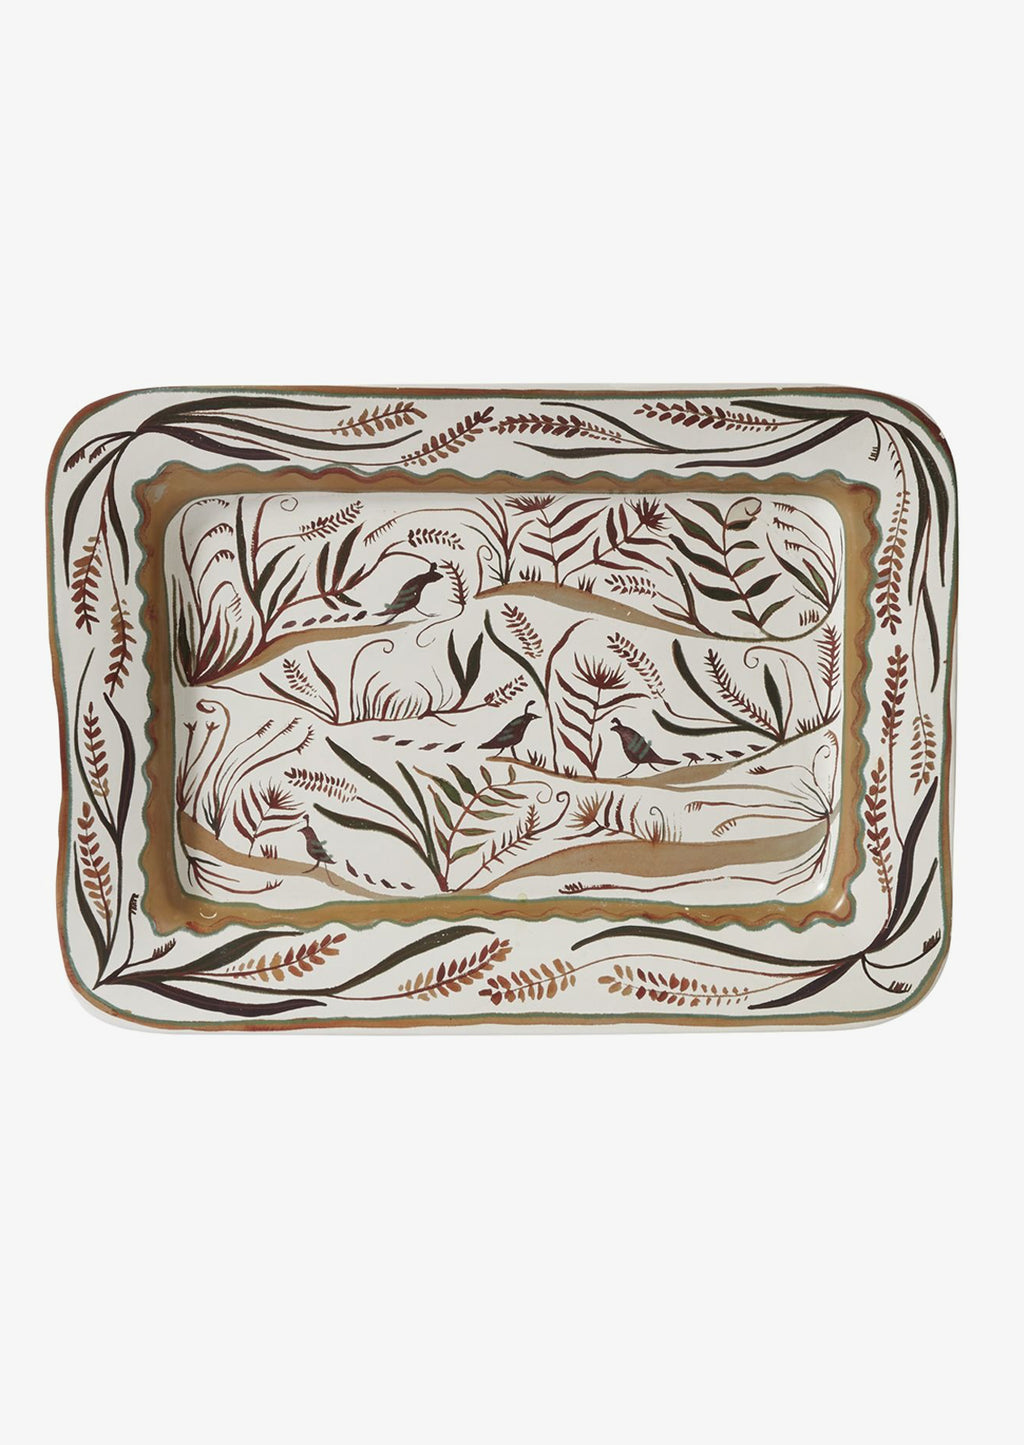 2: A rectangular ceramic platter with quail and nature pattern in brown.